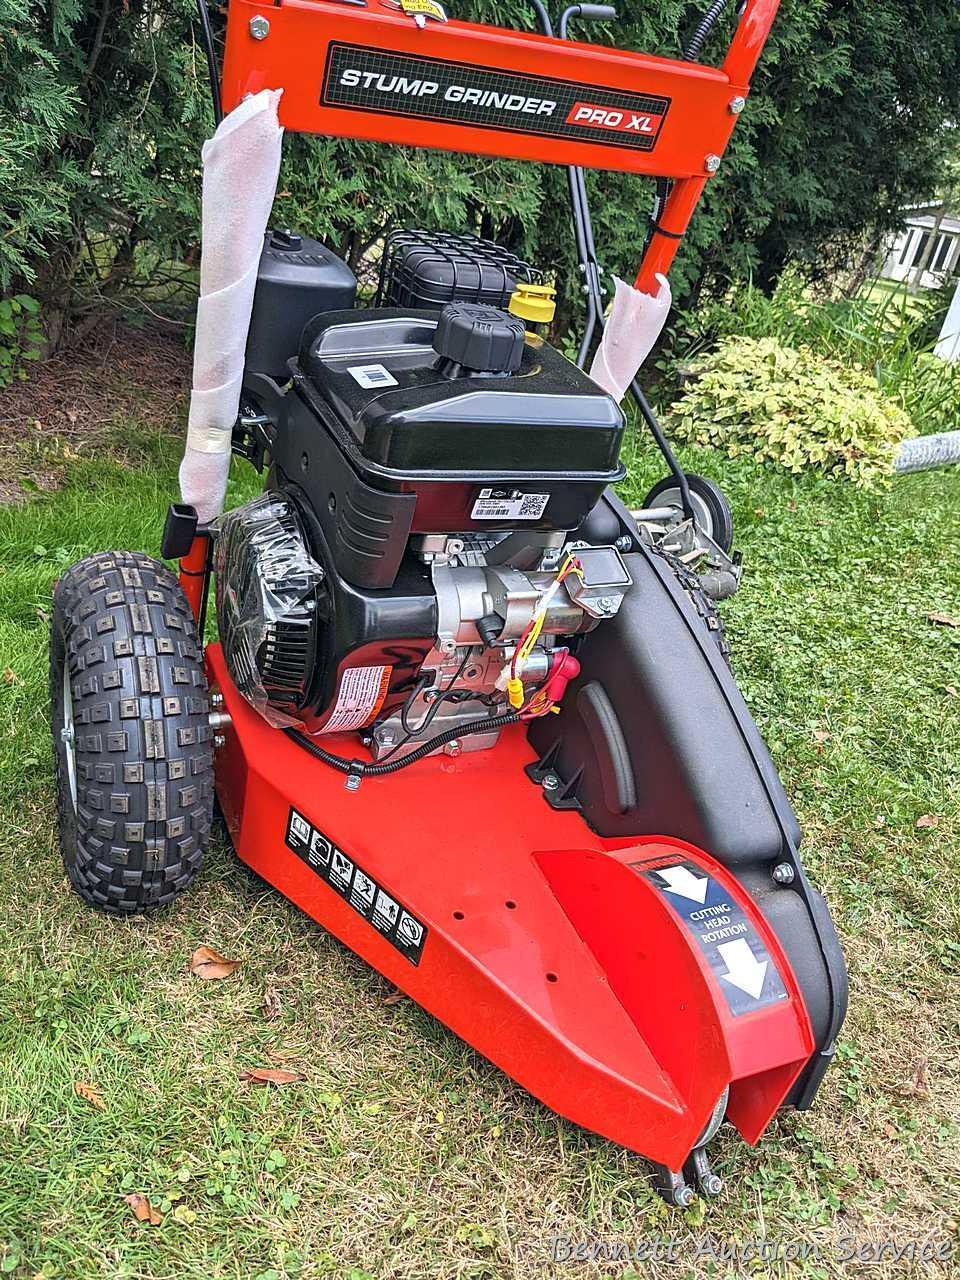 DR Stump Grinder Pro XL comes with manual, battery, oil, wrenches, etc. Appears as-new, as it's not